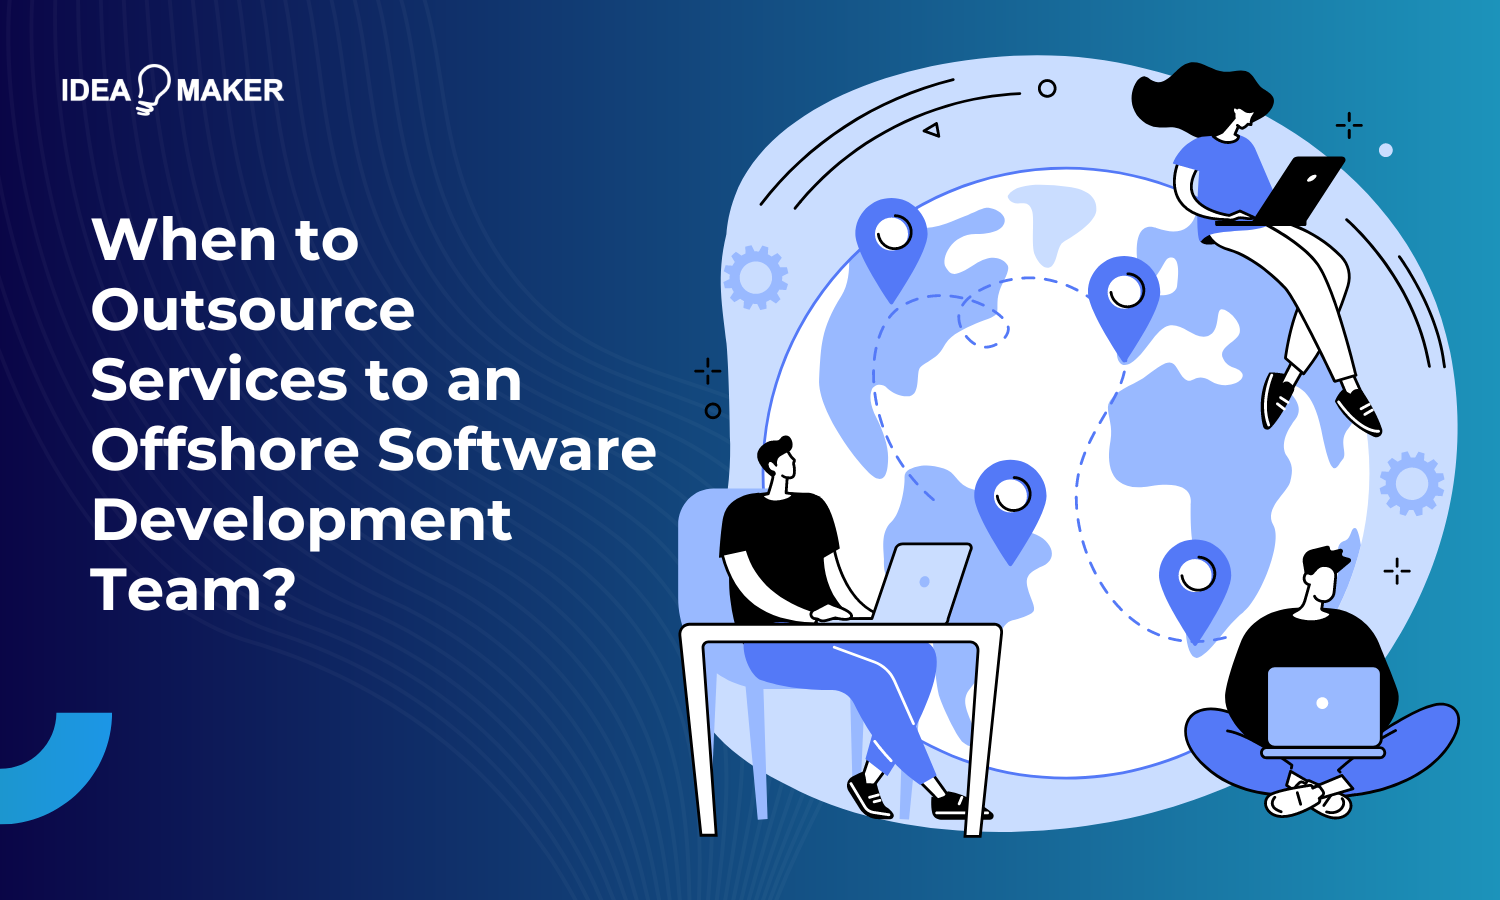 Idea Maker - When to Outsource Services to an Offshore Software Development Team